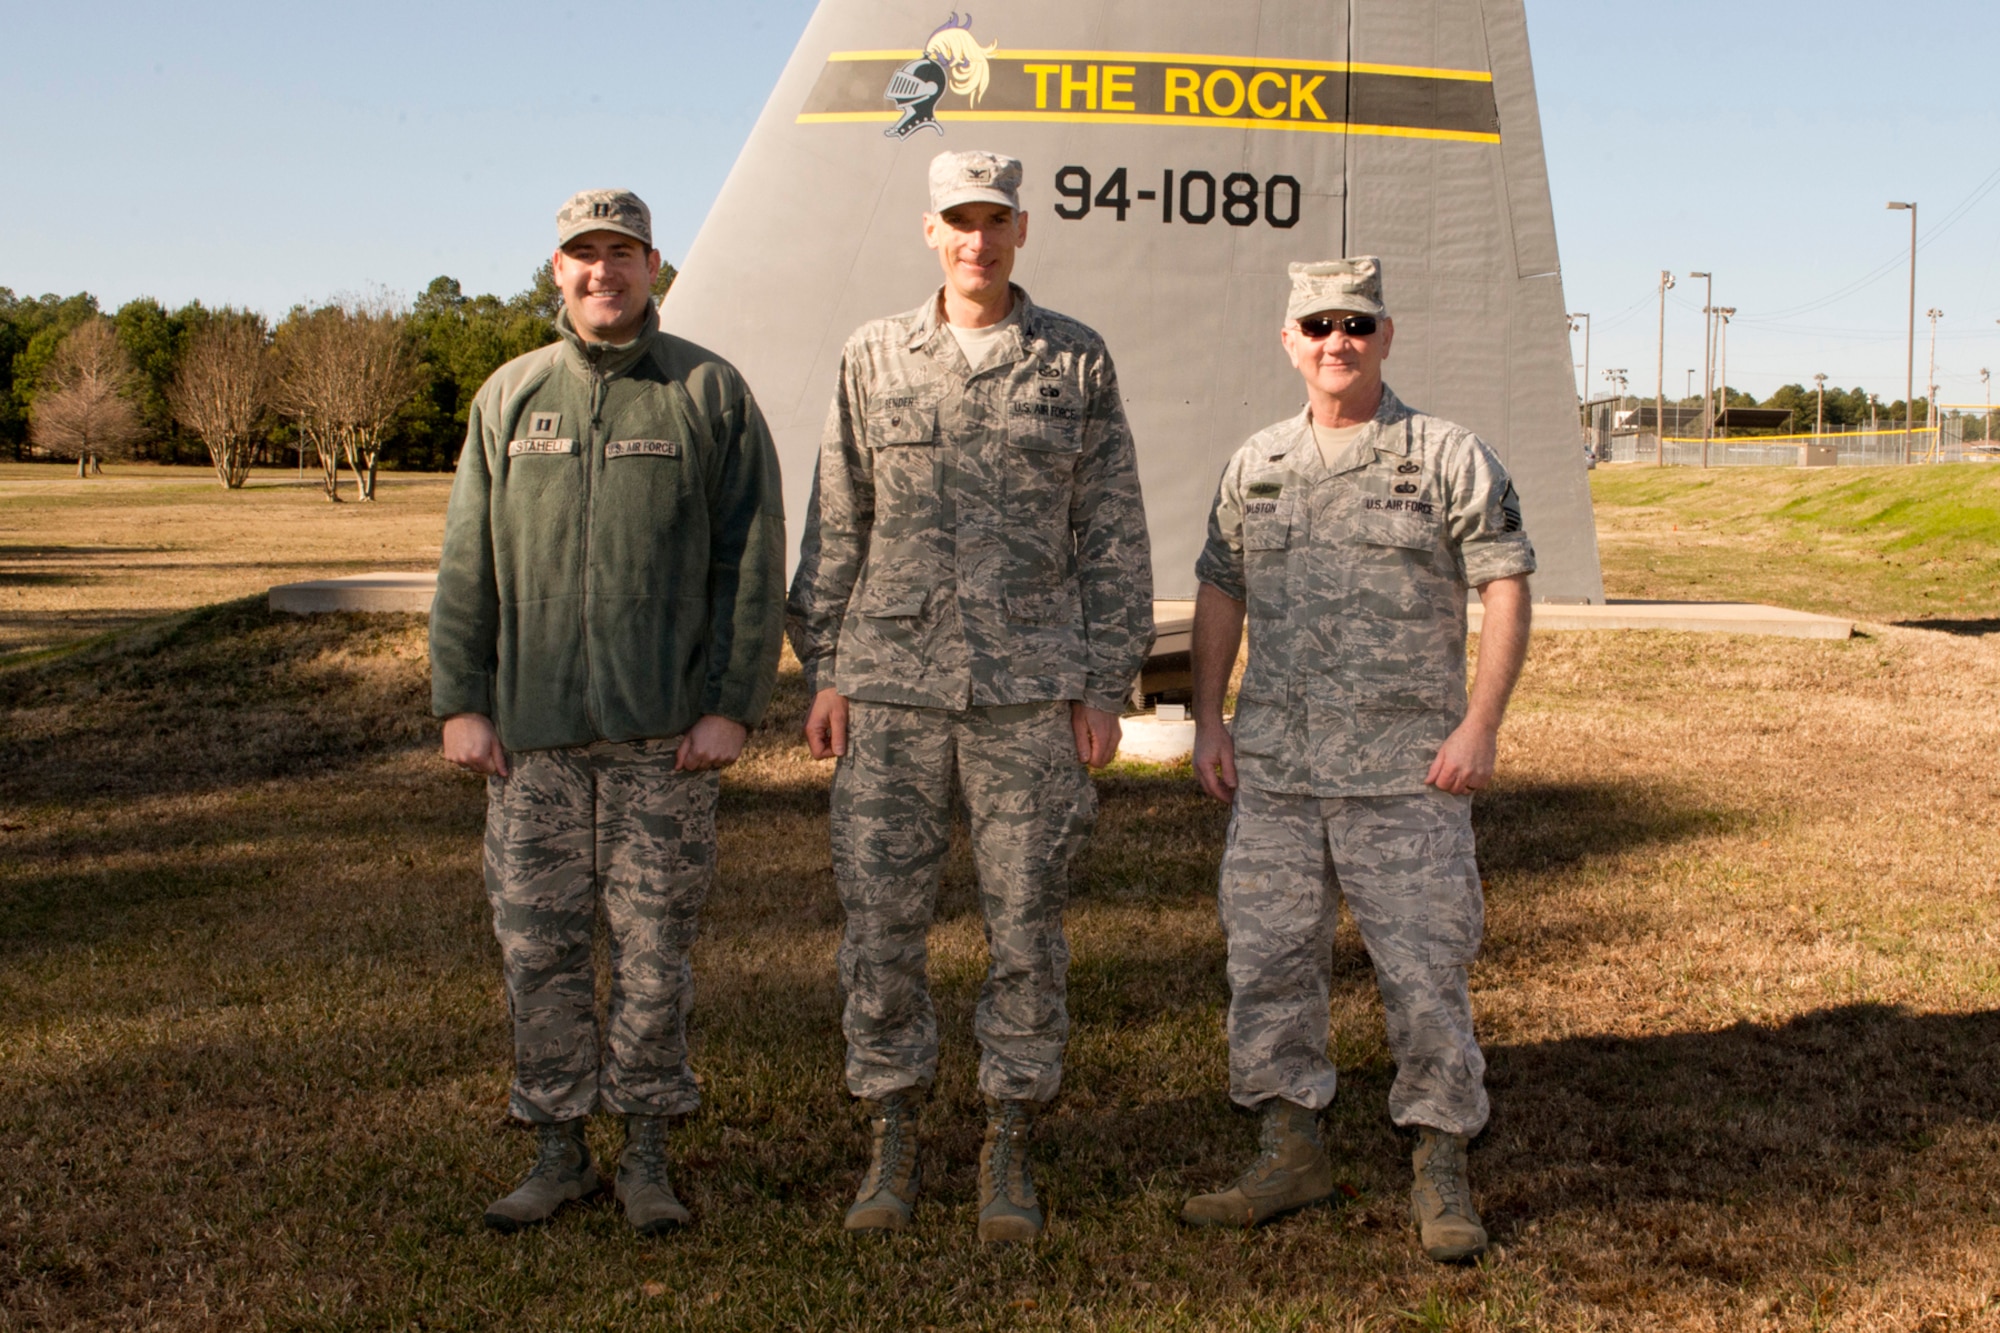 U.S. Air Force Capt. Casey Staheli, public affairs officer, 913th Airlift Group, Col. Bruce Bender, director of public affairs, Headquarters Air Force Reserve Command and Master Sgt. Jeff Walston, public affairs technician, 913th AG, pose for a photo during Bender’s visit to Little Rock Air Force Base, Ark., Jan. 10, 2016. Bender has been in his present assignment since September 2015, and is familiarizing himself with the different public affairs personnel throughout the AFRC. (U.S. Air Force photo by Master Sgt. Jeff walston/Released)    